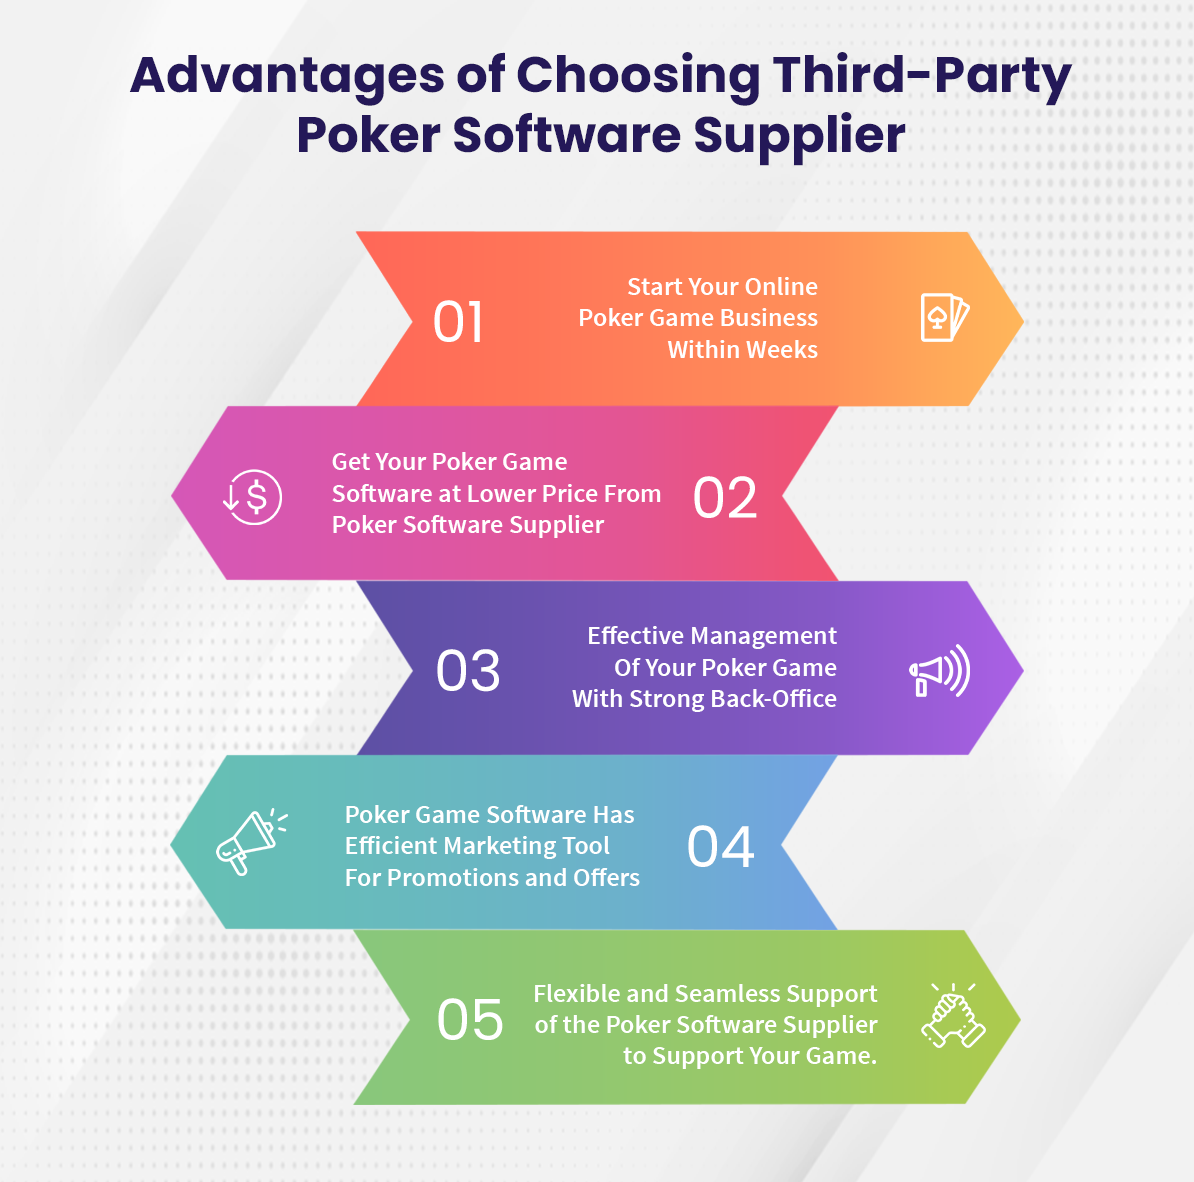 Advantages of Choosing Third-Party Poker Software Supplier